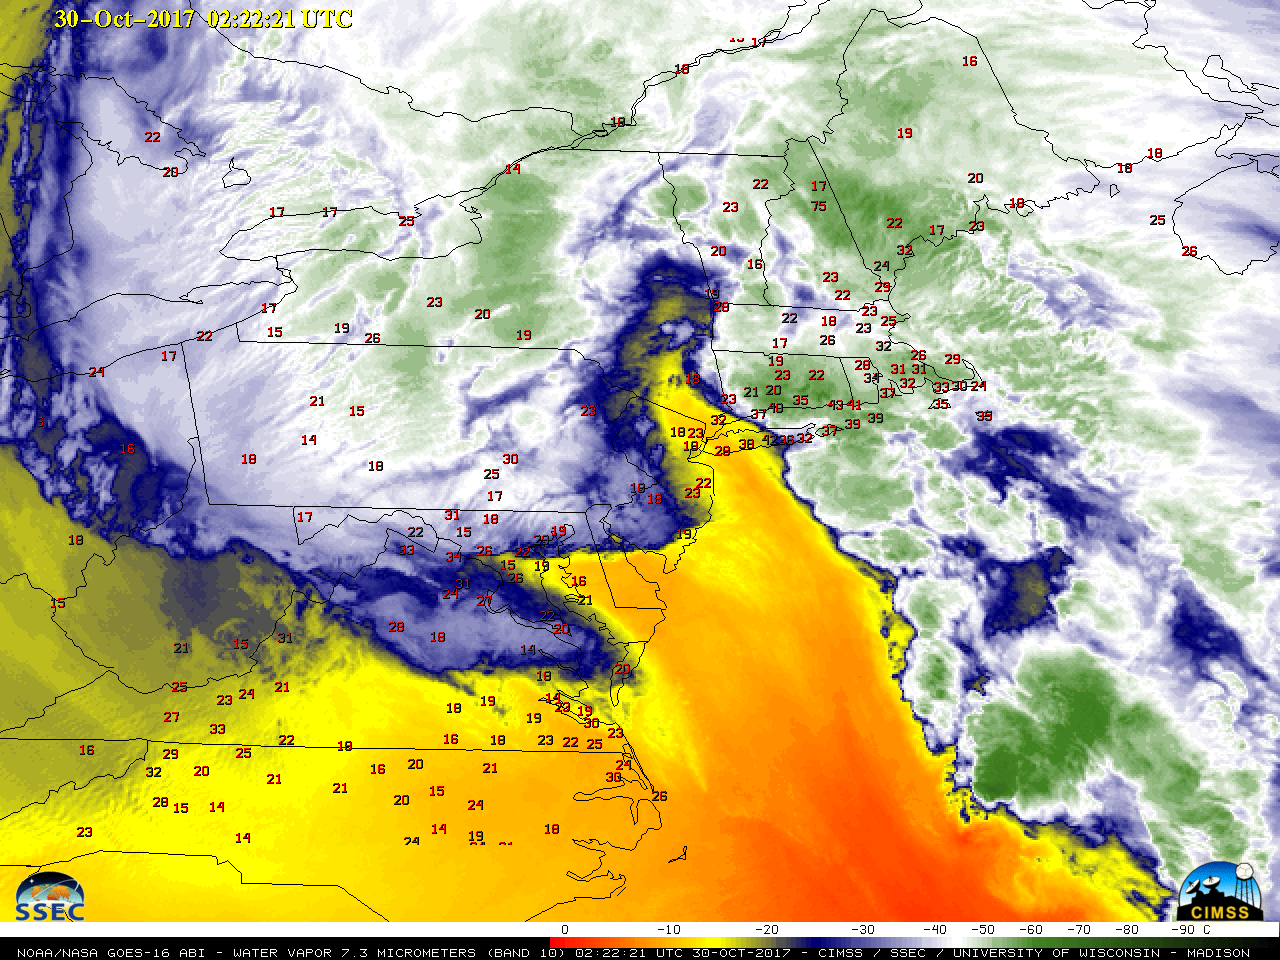 GOES-16 Lower-level Water Vapor (7.3 µm) images, with hourly surface wind gusts (in knots) plotted in red [click to play MP4 animation]